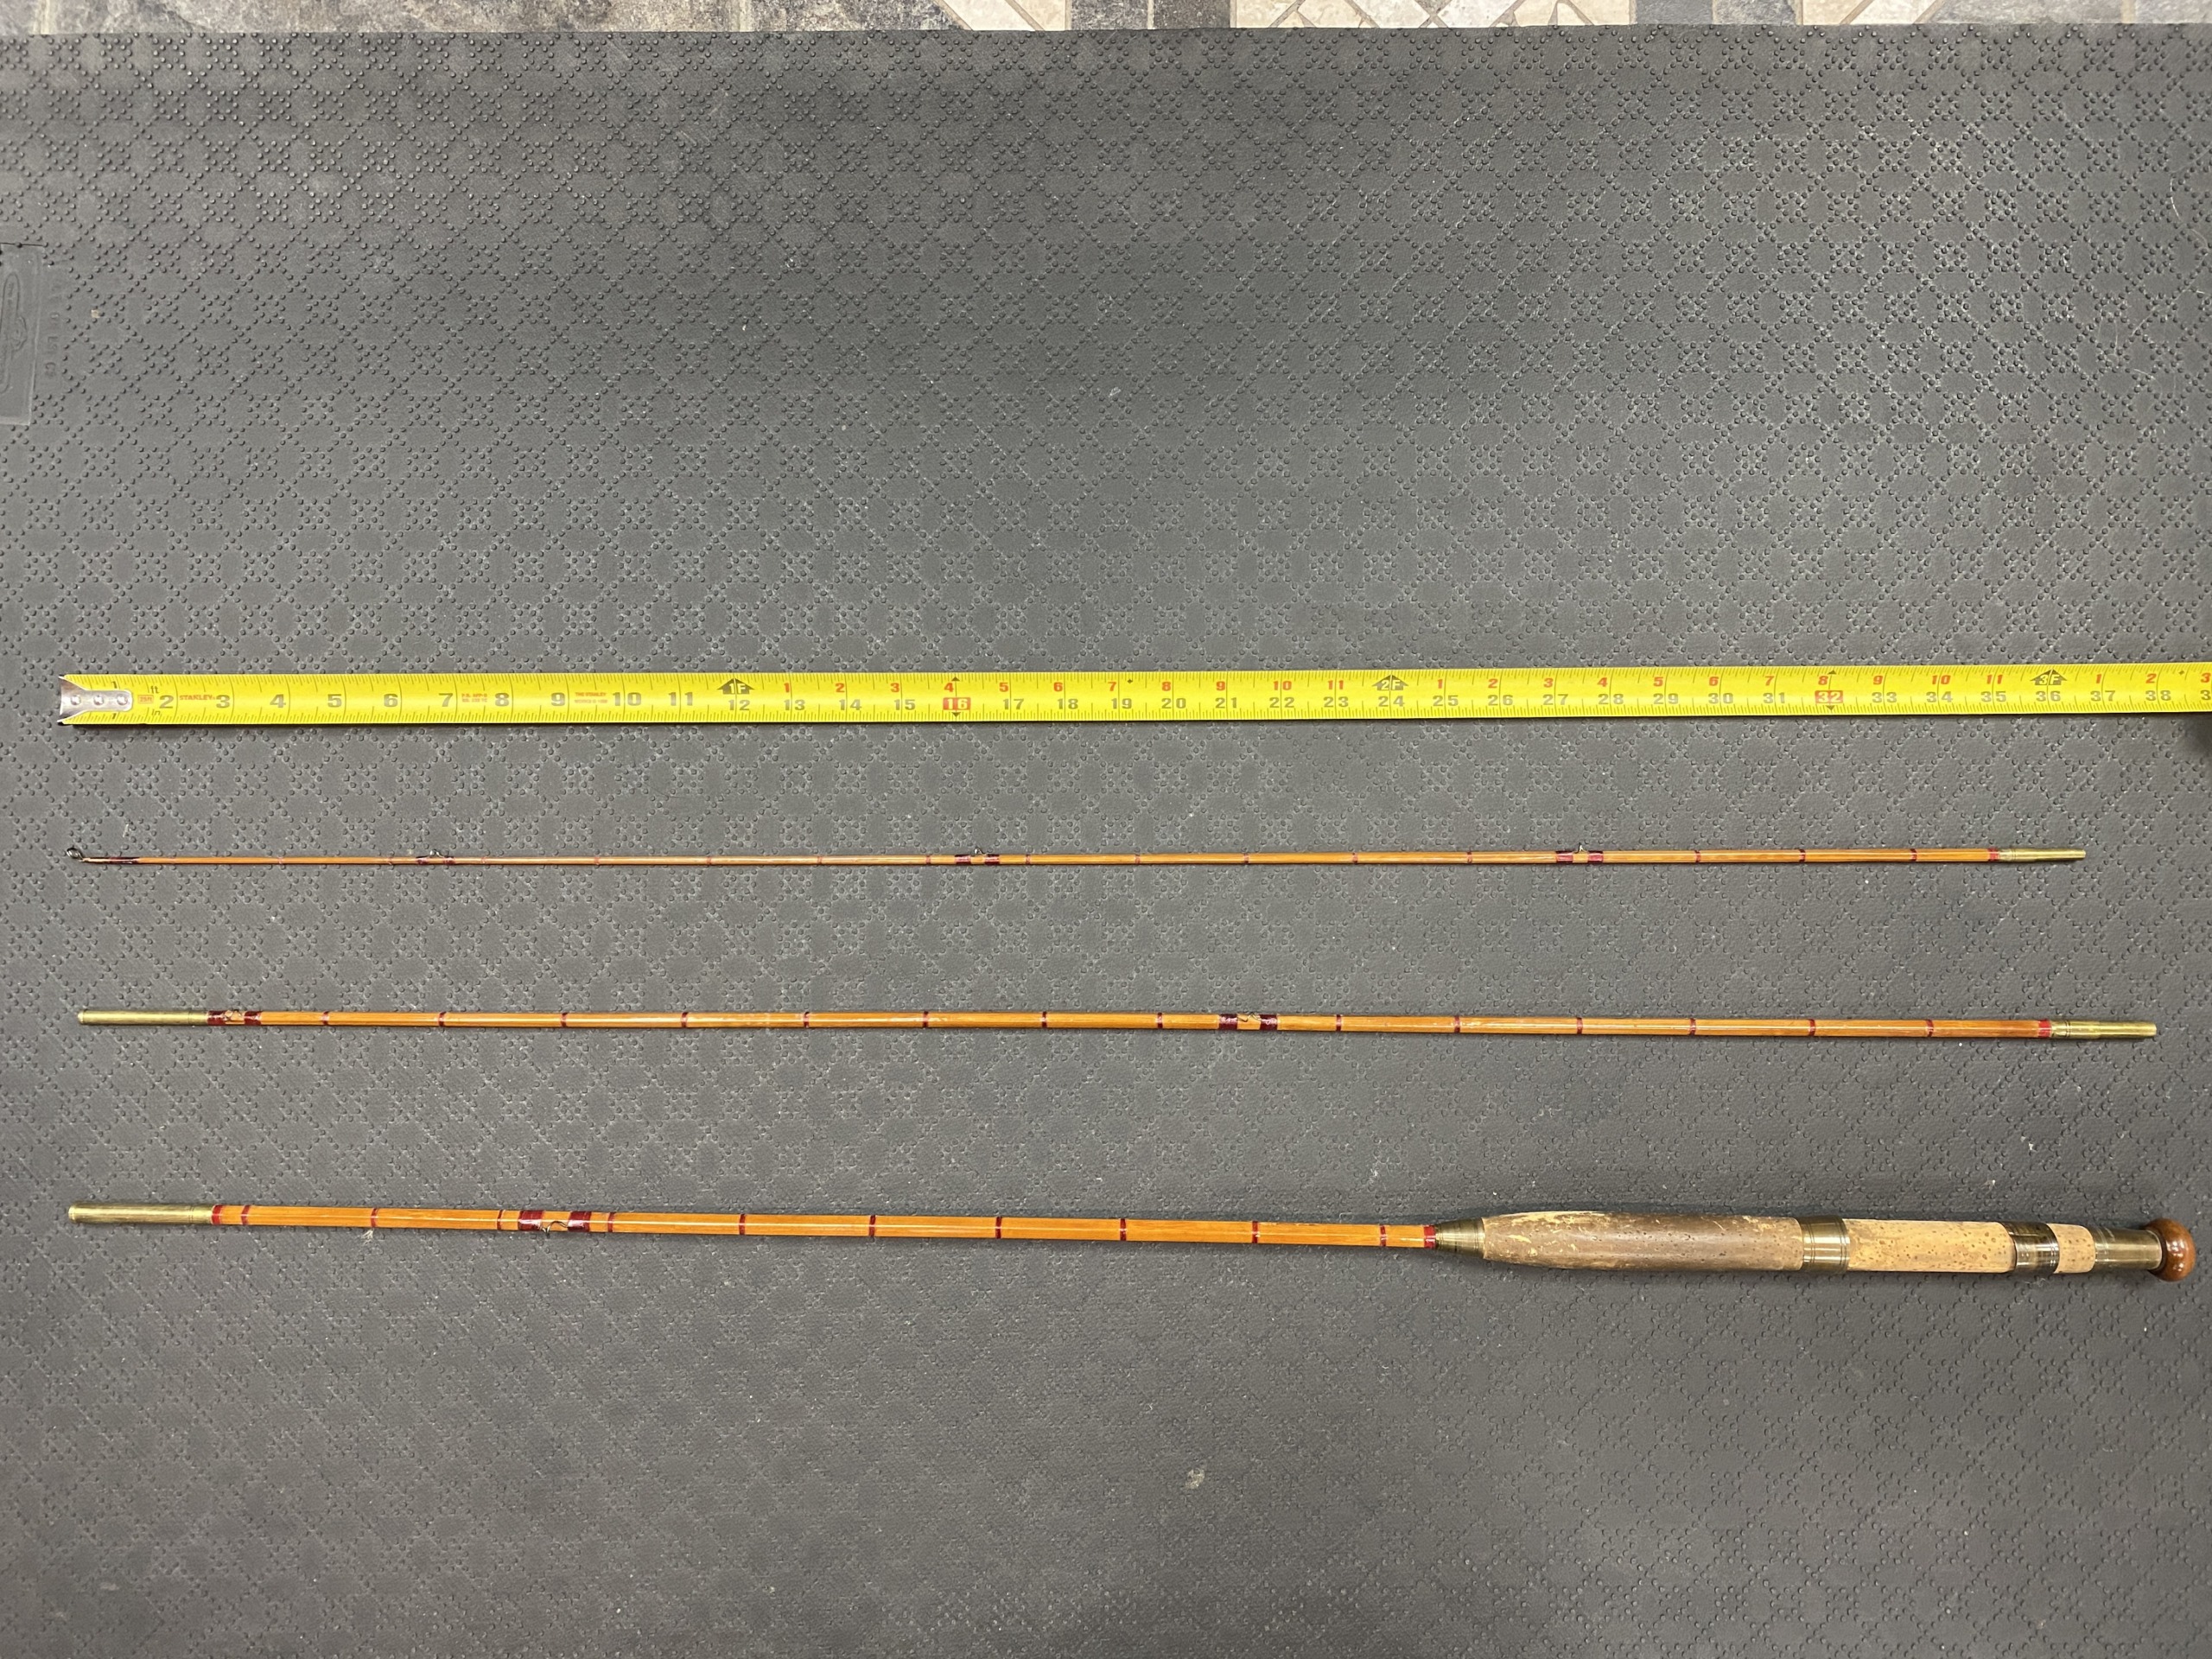 https://thefirstcast.ca/wp-content/uploads/2022/10/Vintage-Milwards-9-Foot-3-Piece-Bamboo-Fly-Rod-A-scaled.jpg